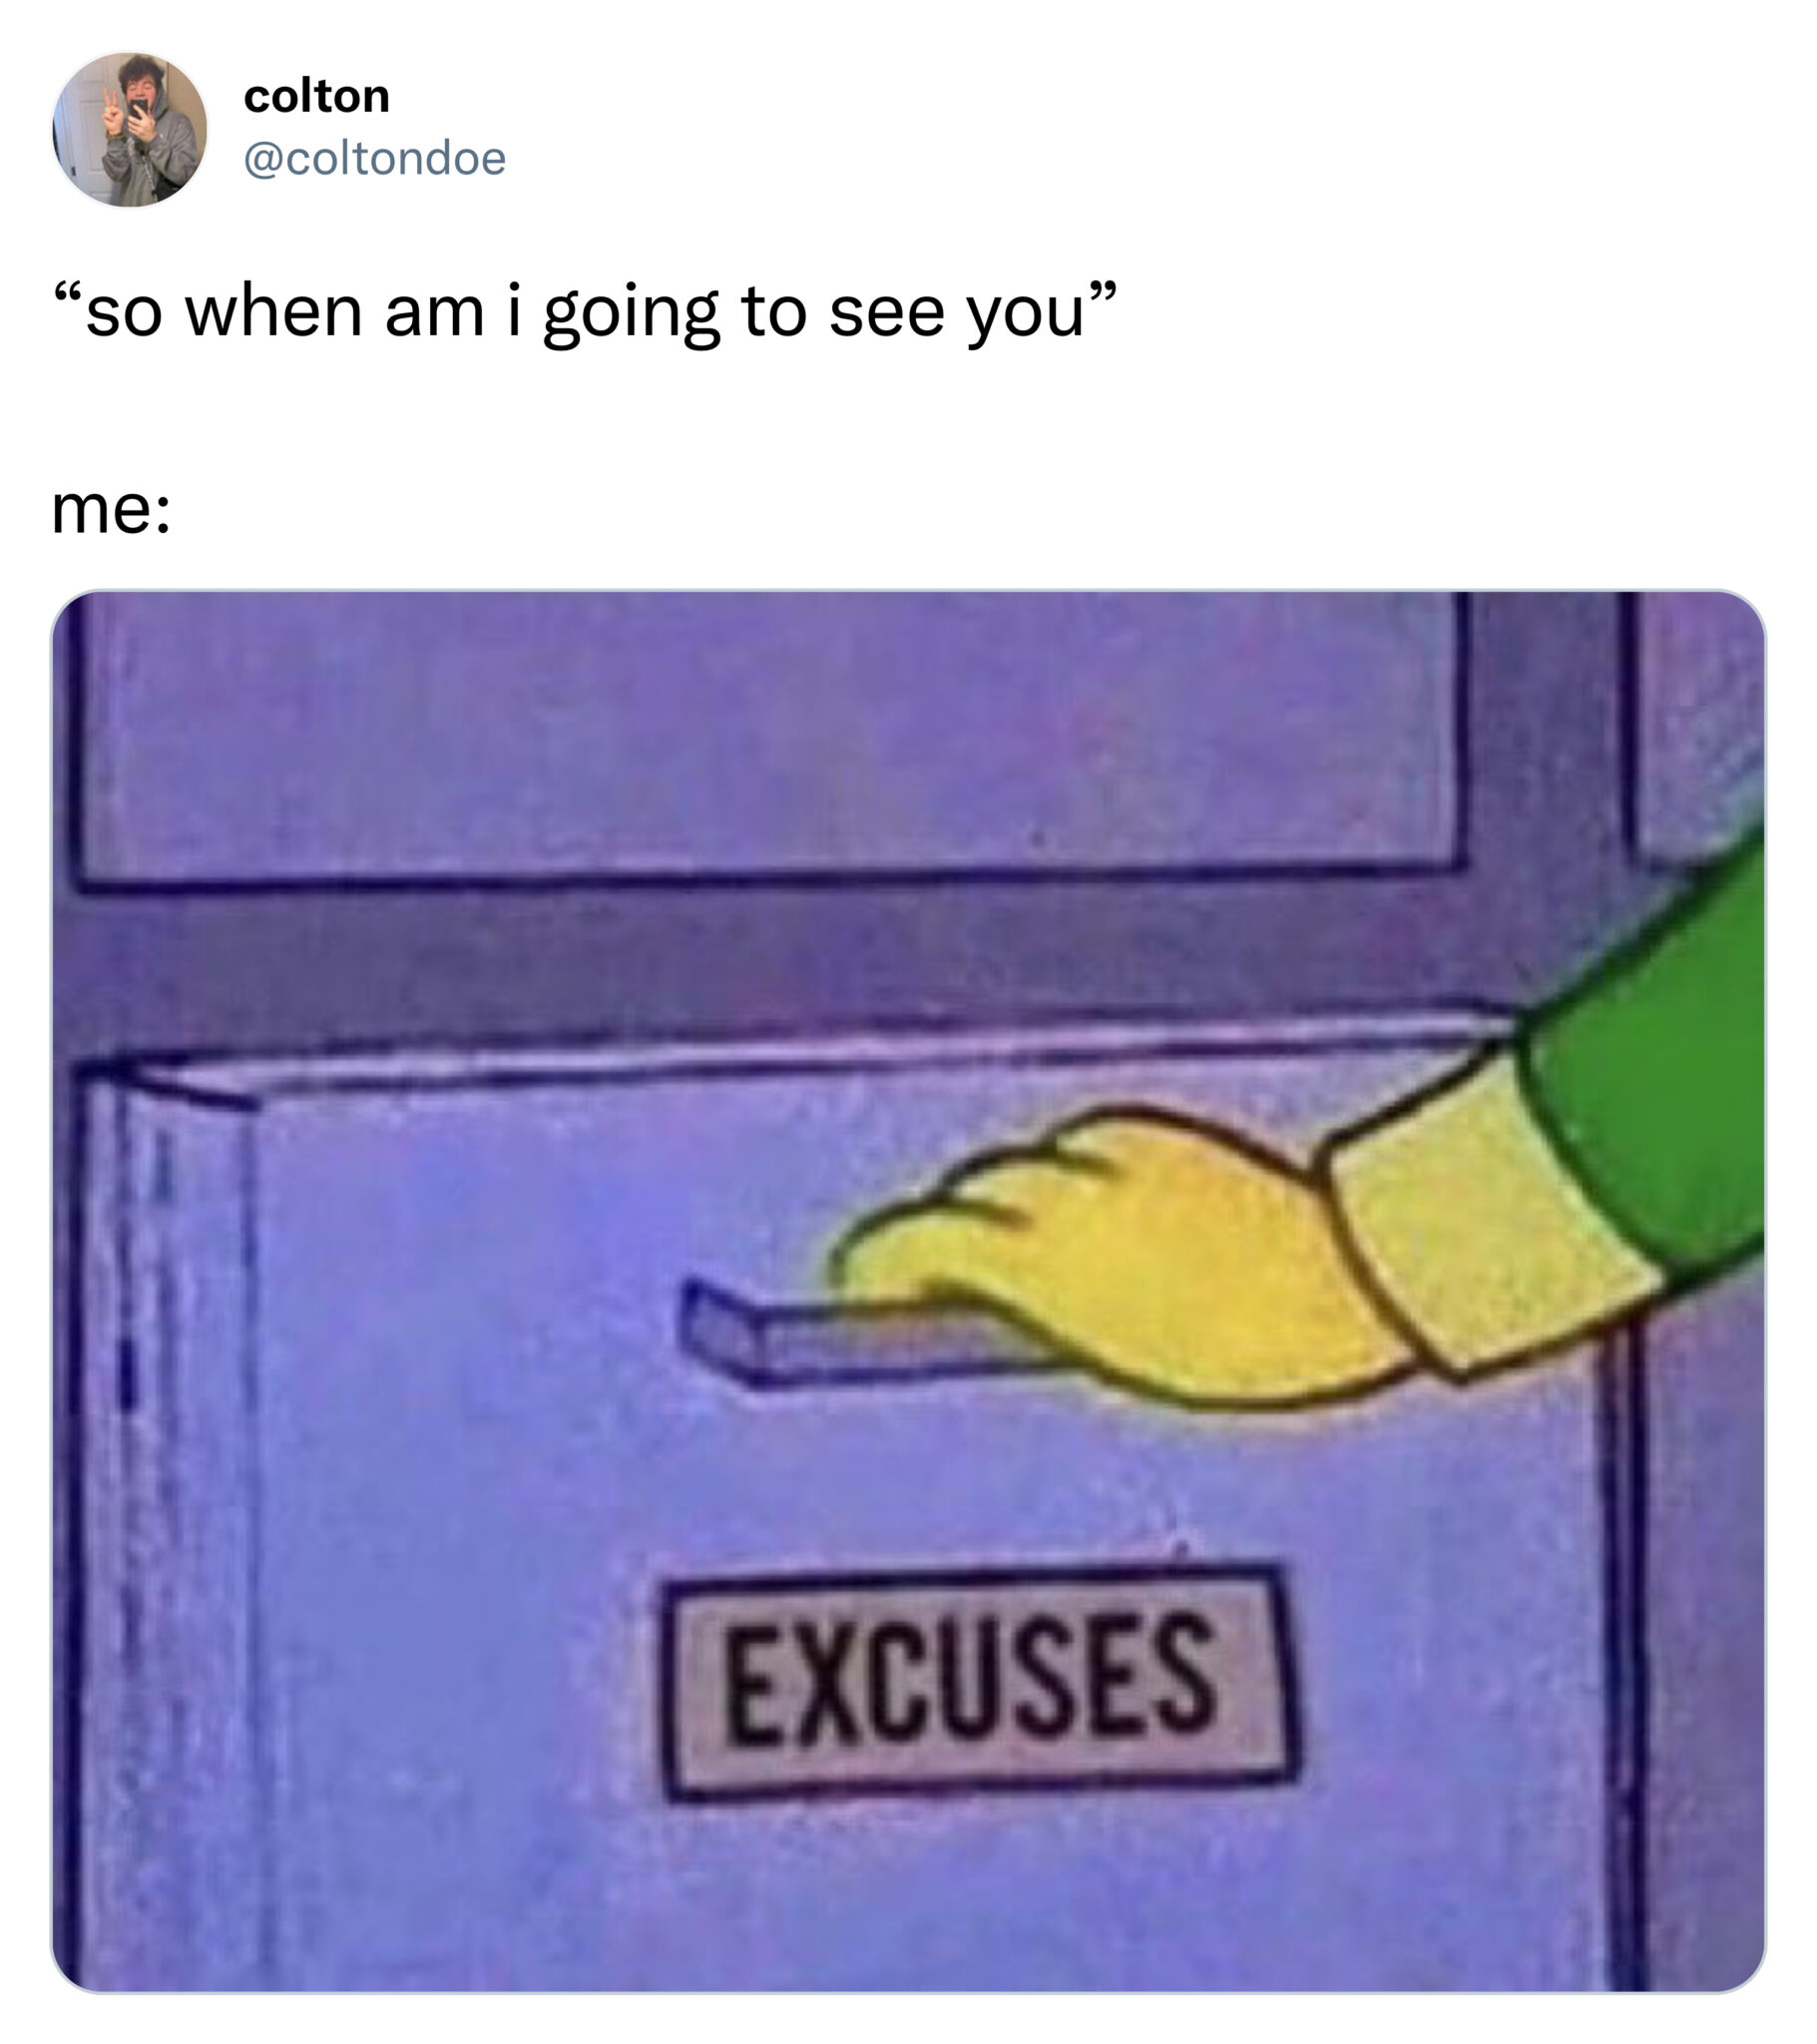 Funny Tweets - So when am i going to see you, Excuses